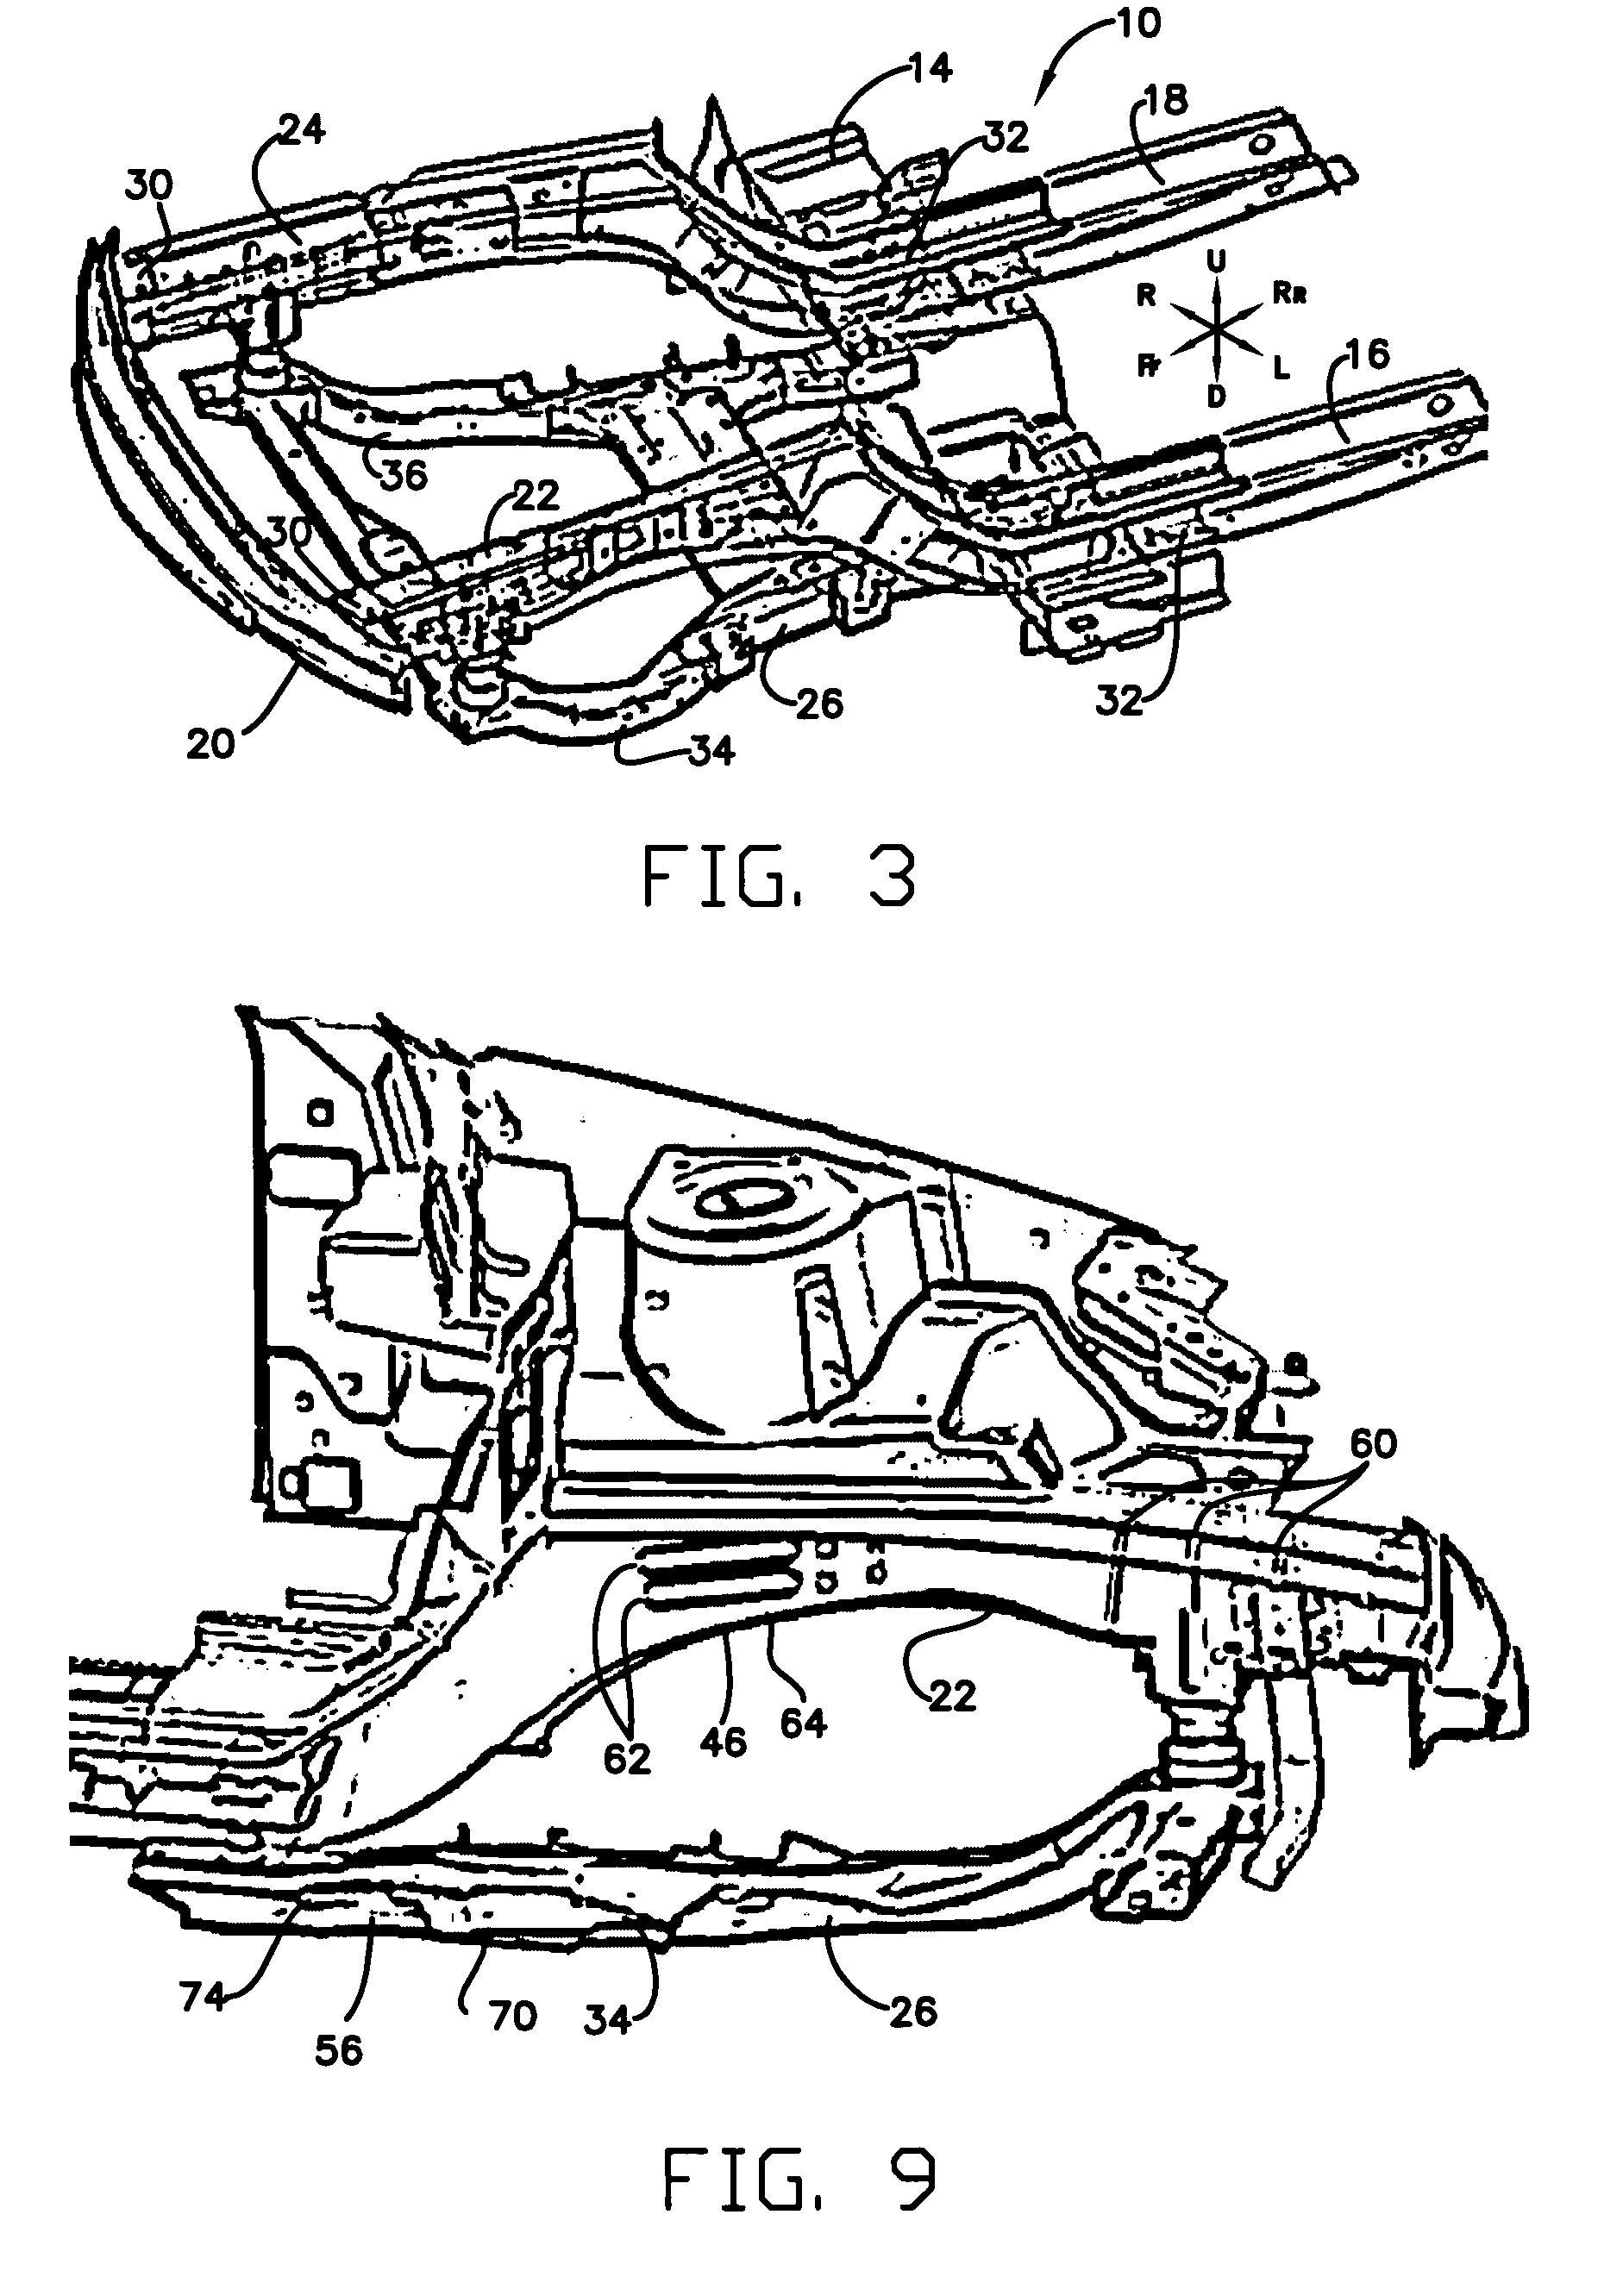 Energy absorbing front frame structure for a vehicle